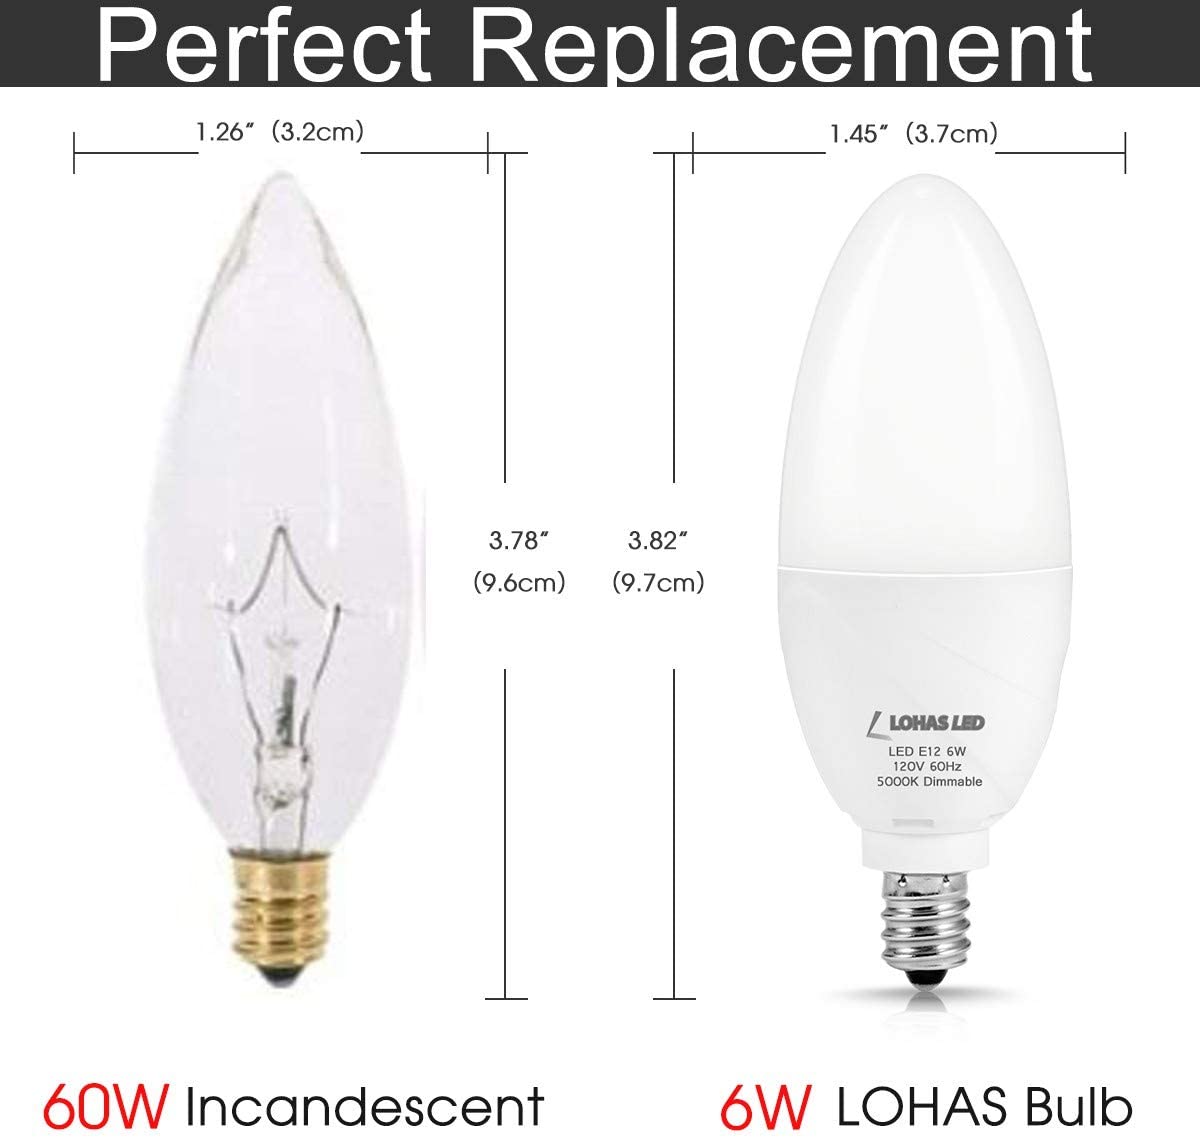 Perfect replacement of dimmable led bulbs